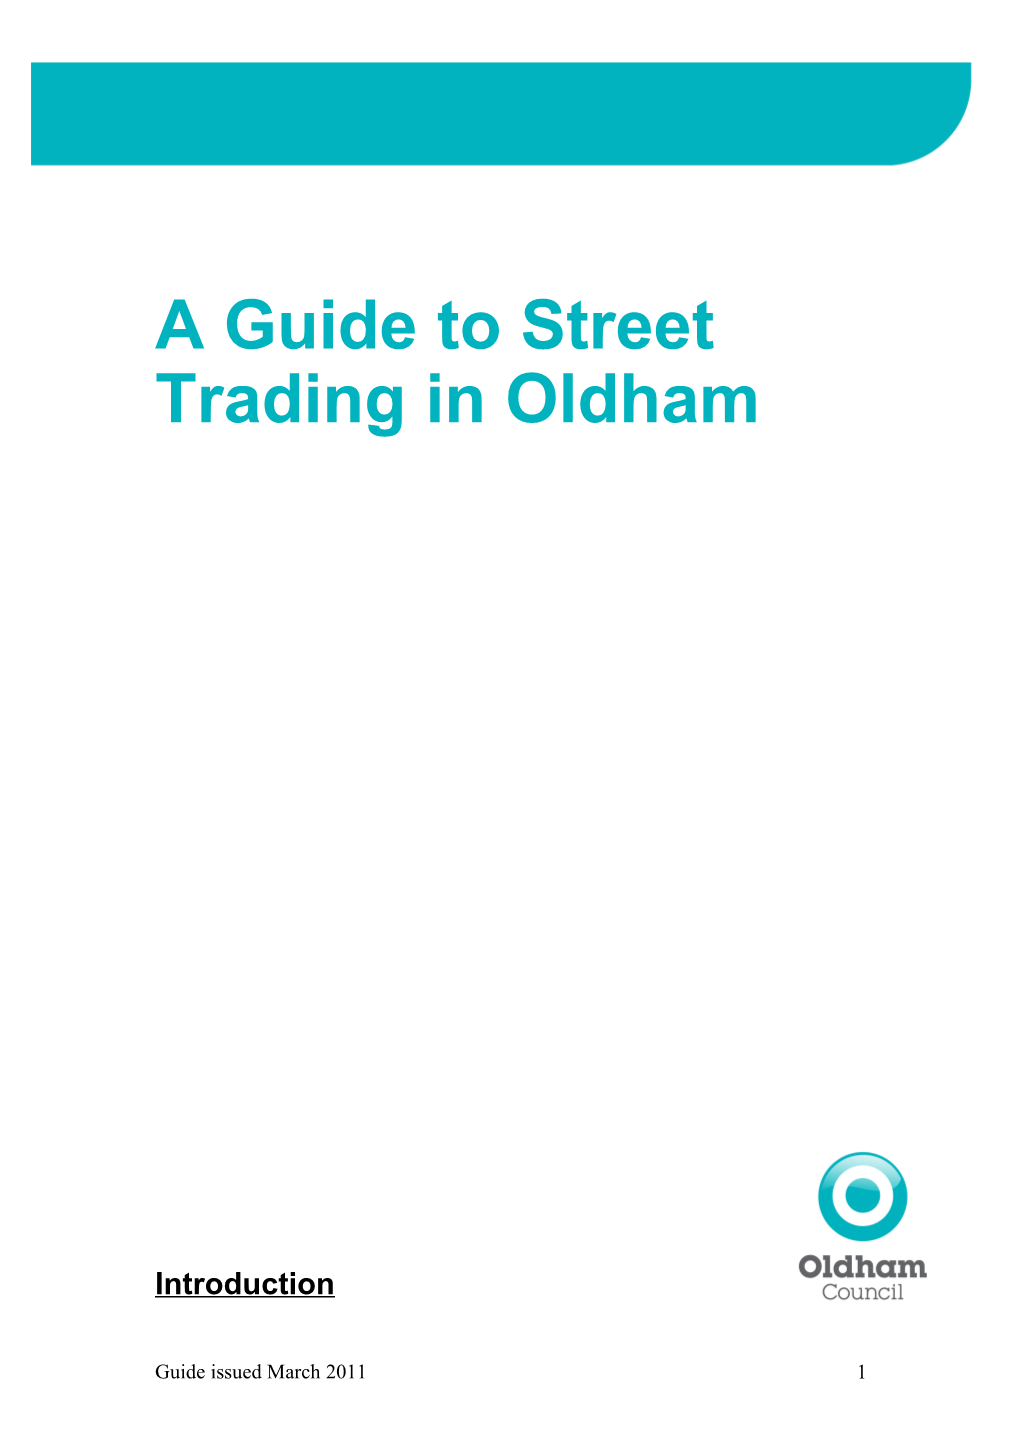 A Guide to Street Trading Inoldham